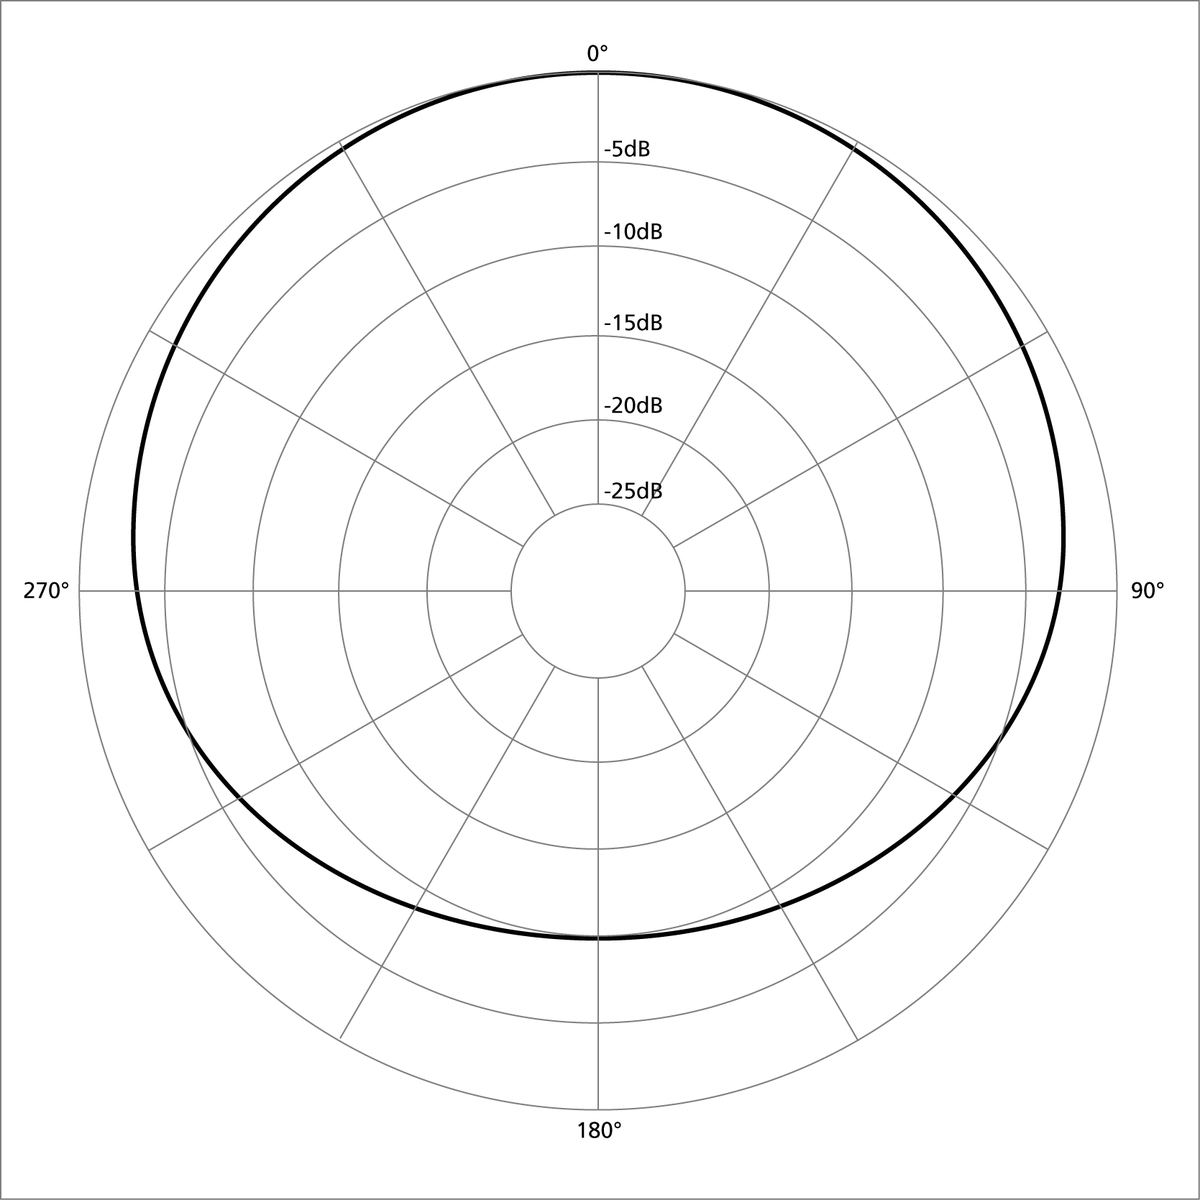 Polar pattern subcardioid.png